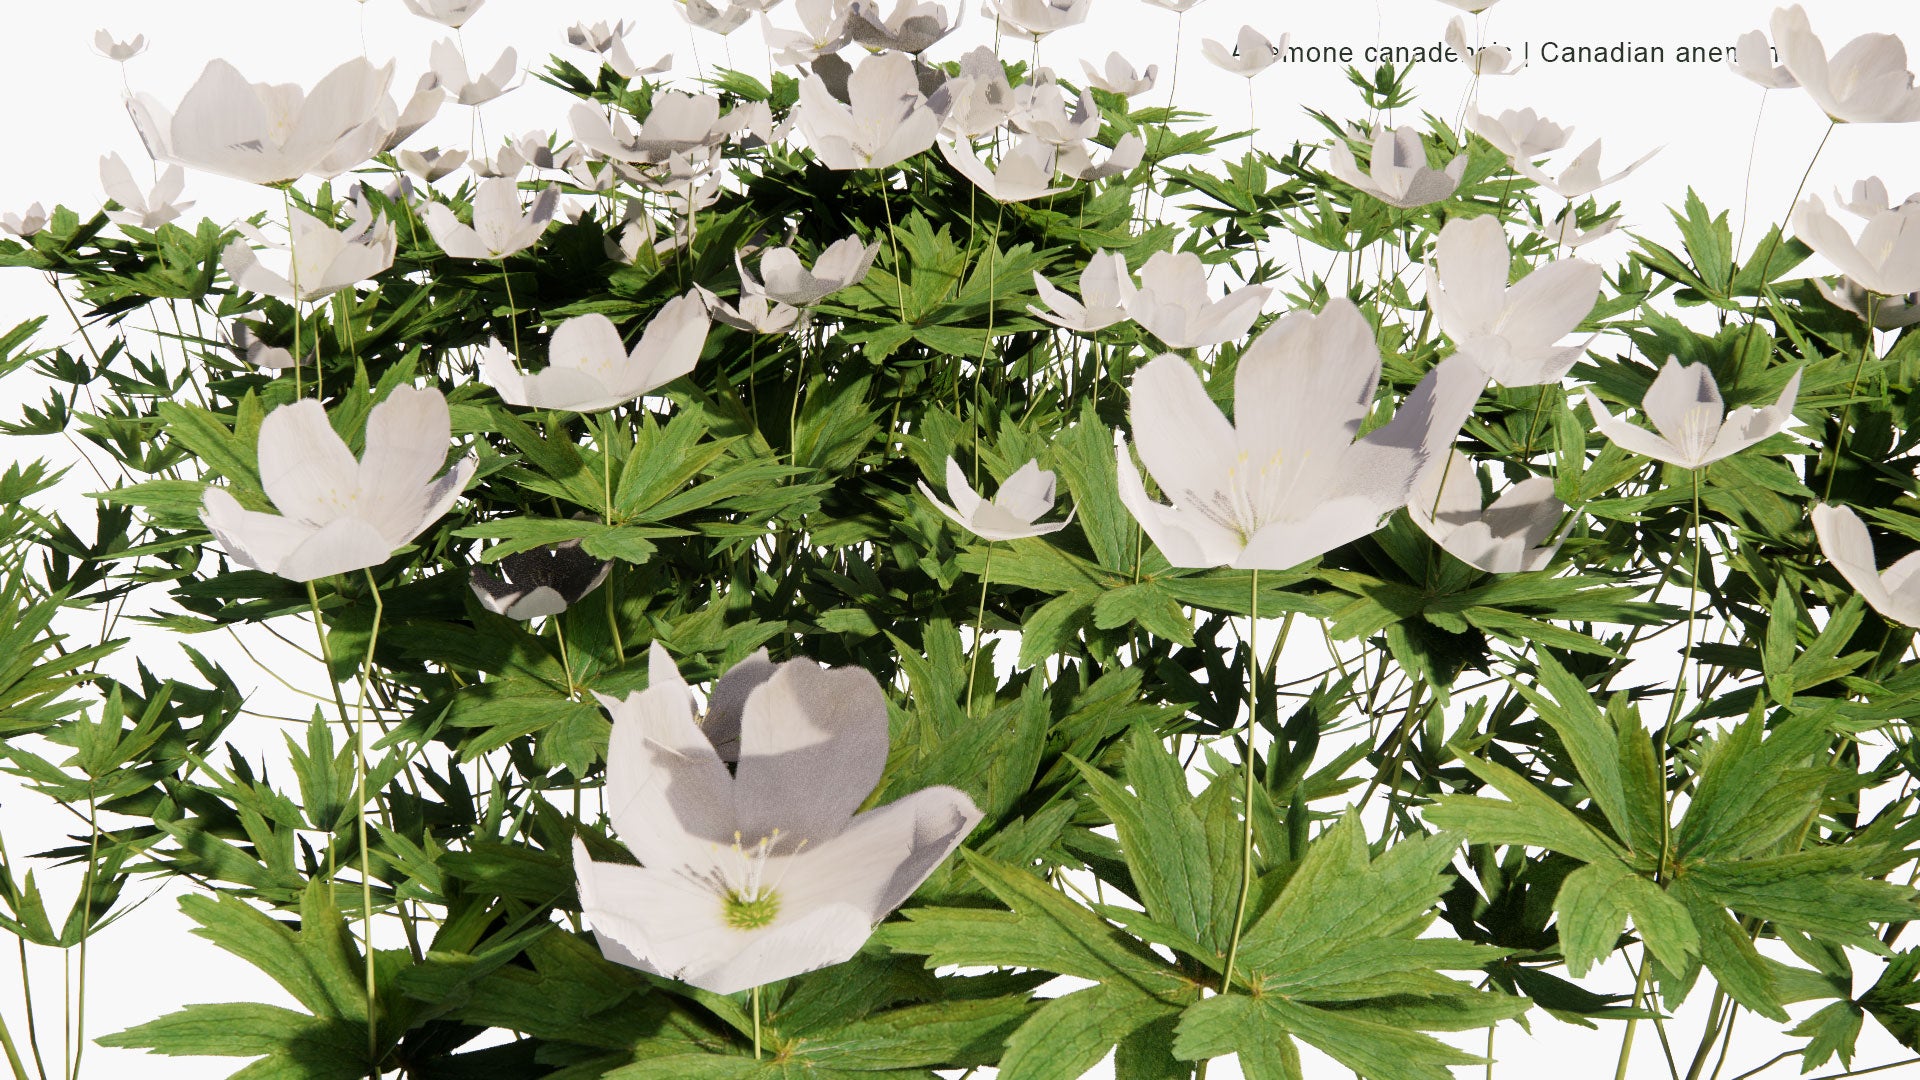 Low Poly Anemone Canadensis - Canada Anemone, Round-Headed Anemone, Meadow Anemone, Windflower, Crowfoot (3D Model)